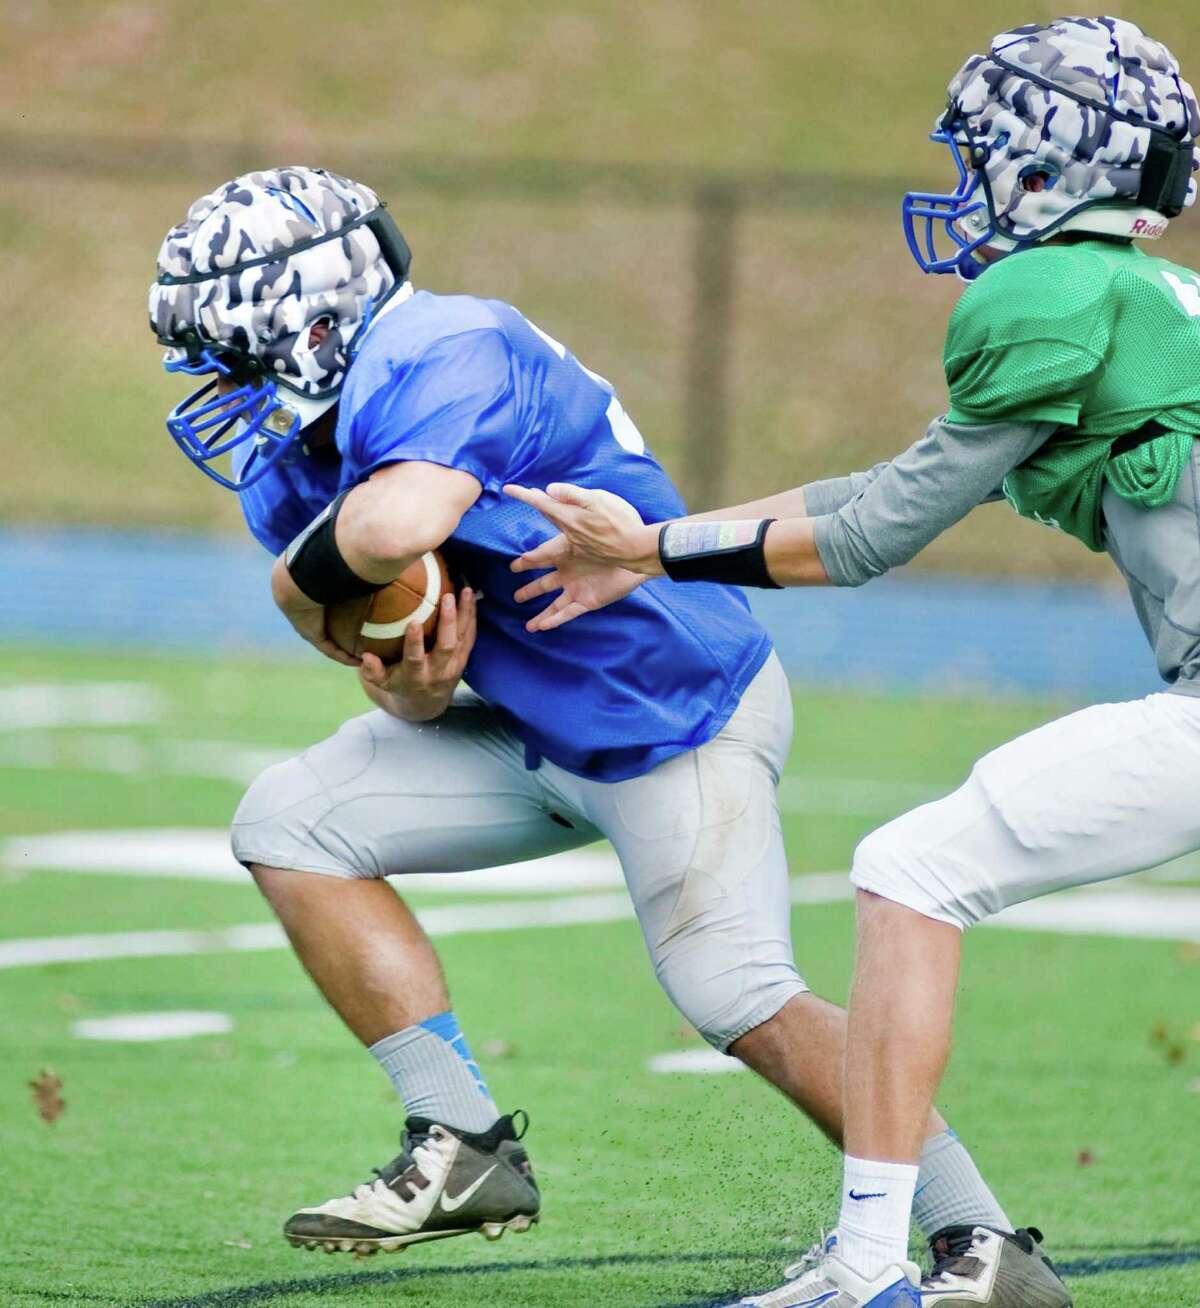 Nick Rubino takes the handoff during a Newtown High School football practice. Wednesday, Oct. 15, 2014